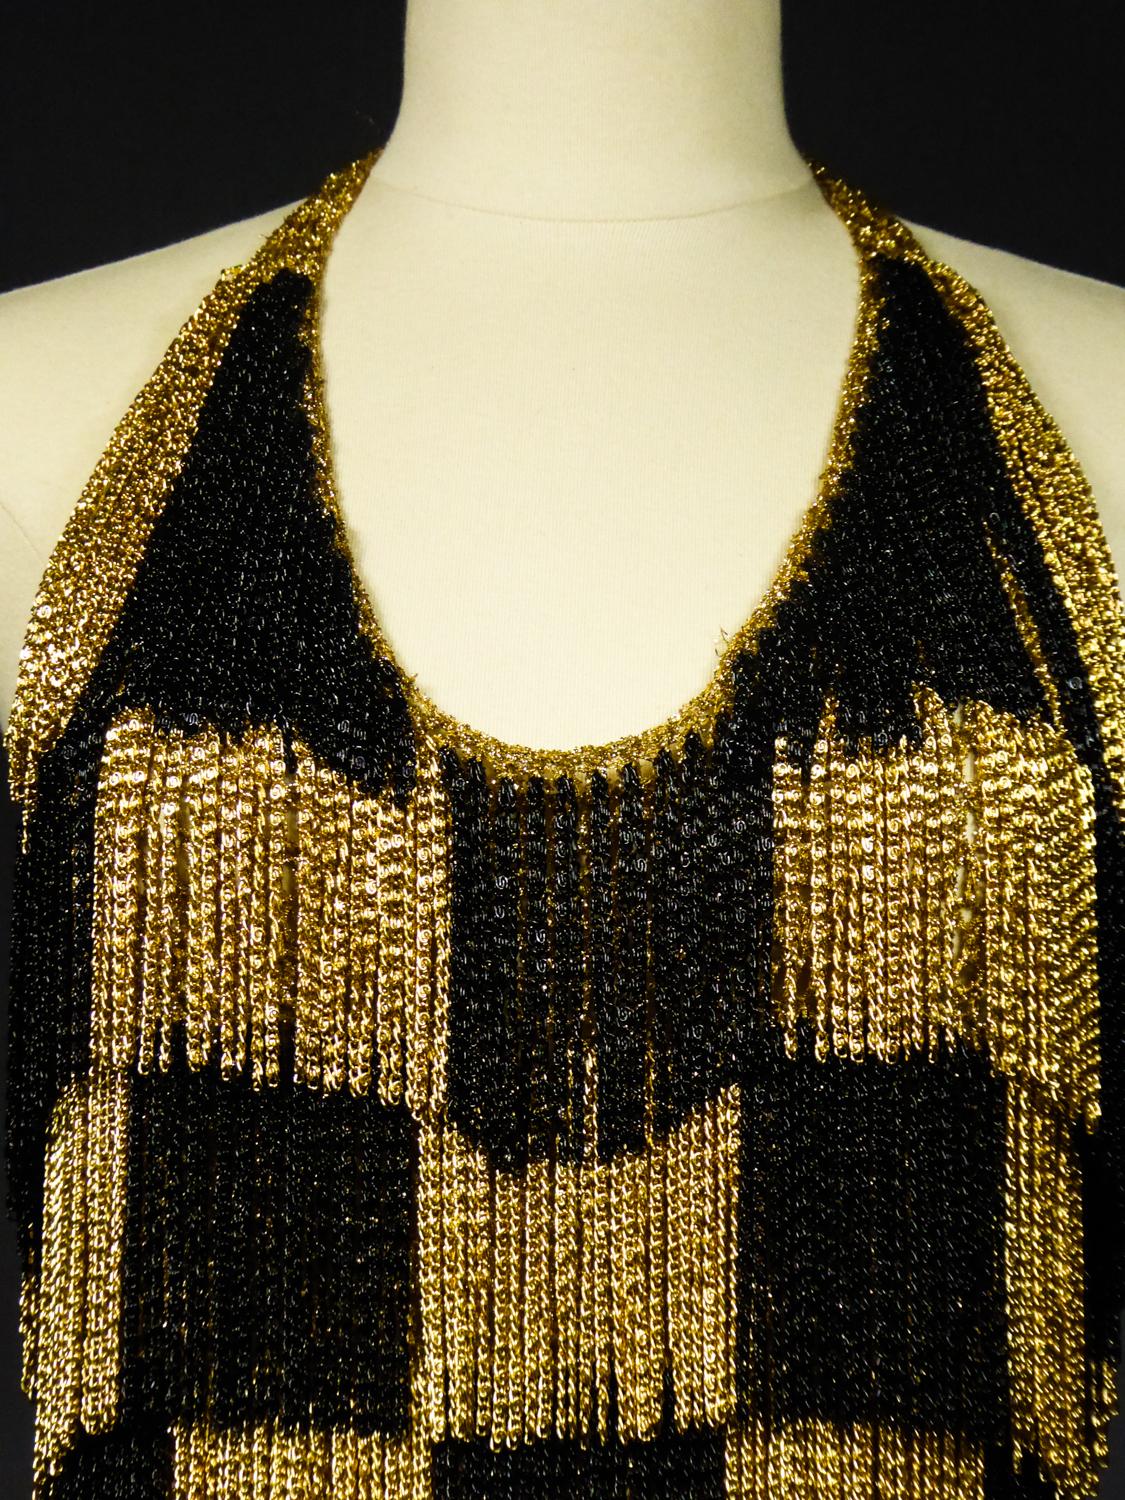 Circa 1970
France

Loris Azzaro backless top in gold Lurex knitwear and small gold and black chains from the 1970s and the Parisian Music Hall period. Knotting of the top with Lurex ties behind the neck allowing a large plunging neckline for the